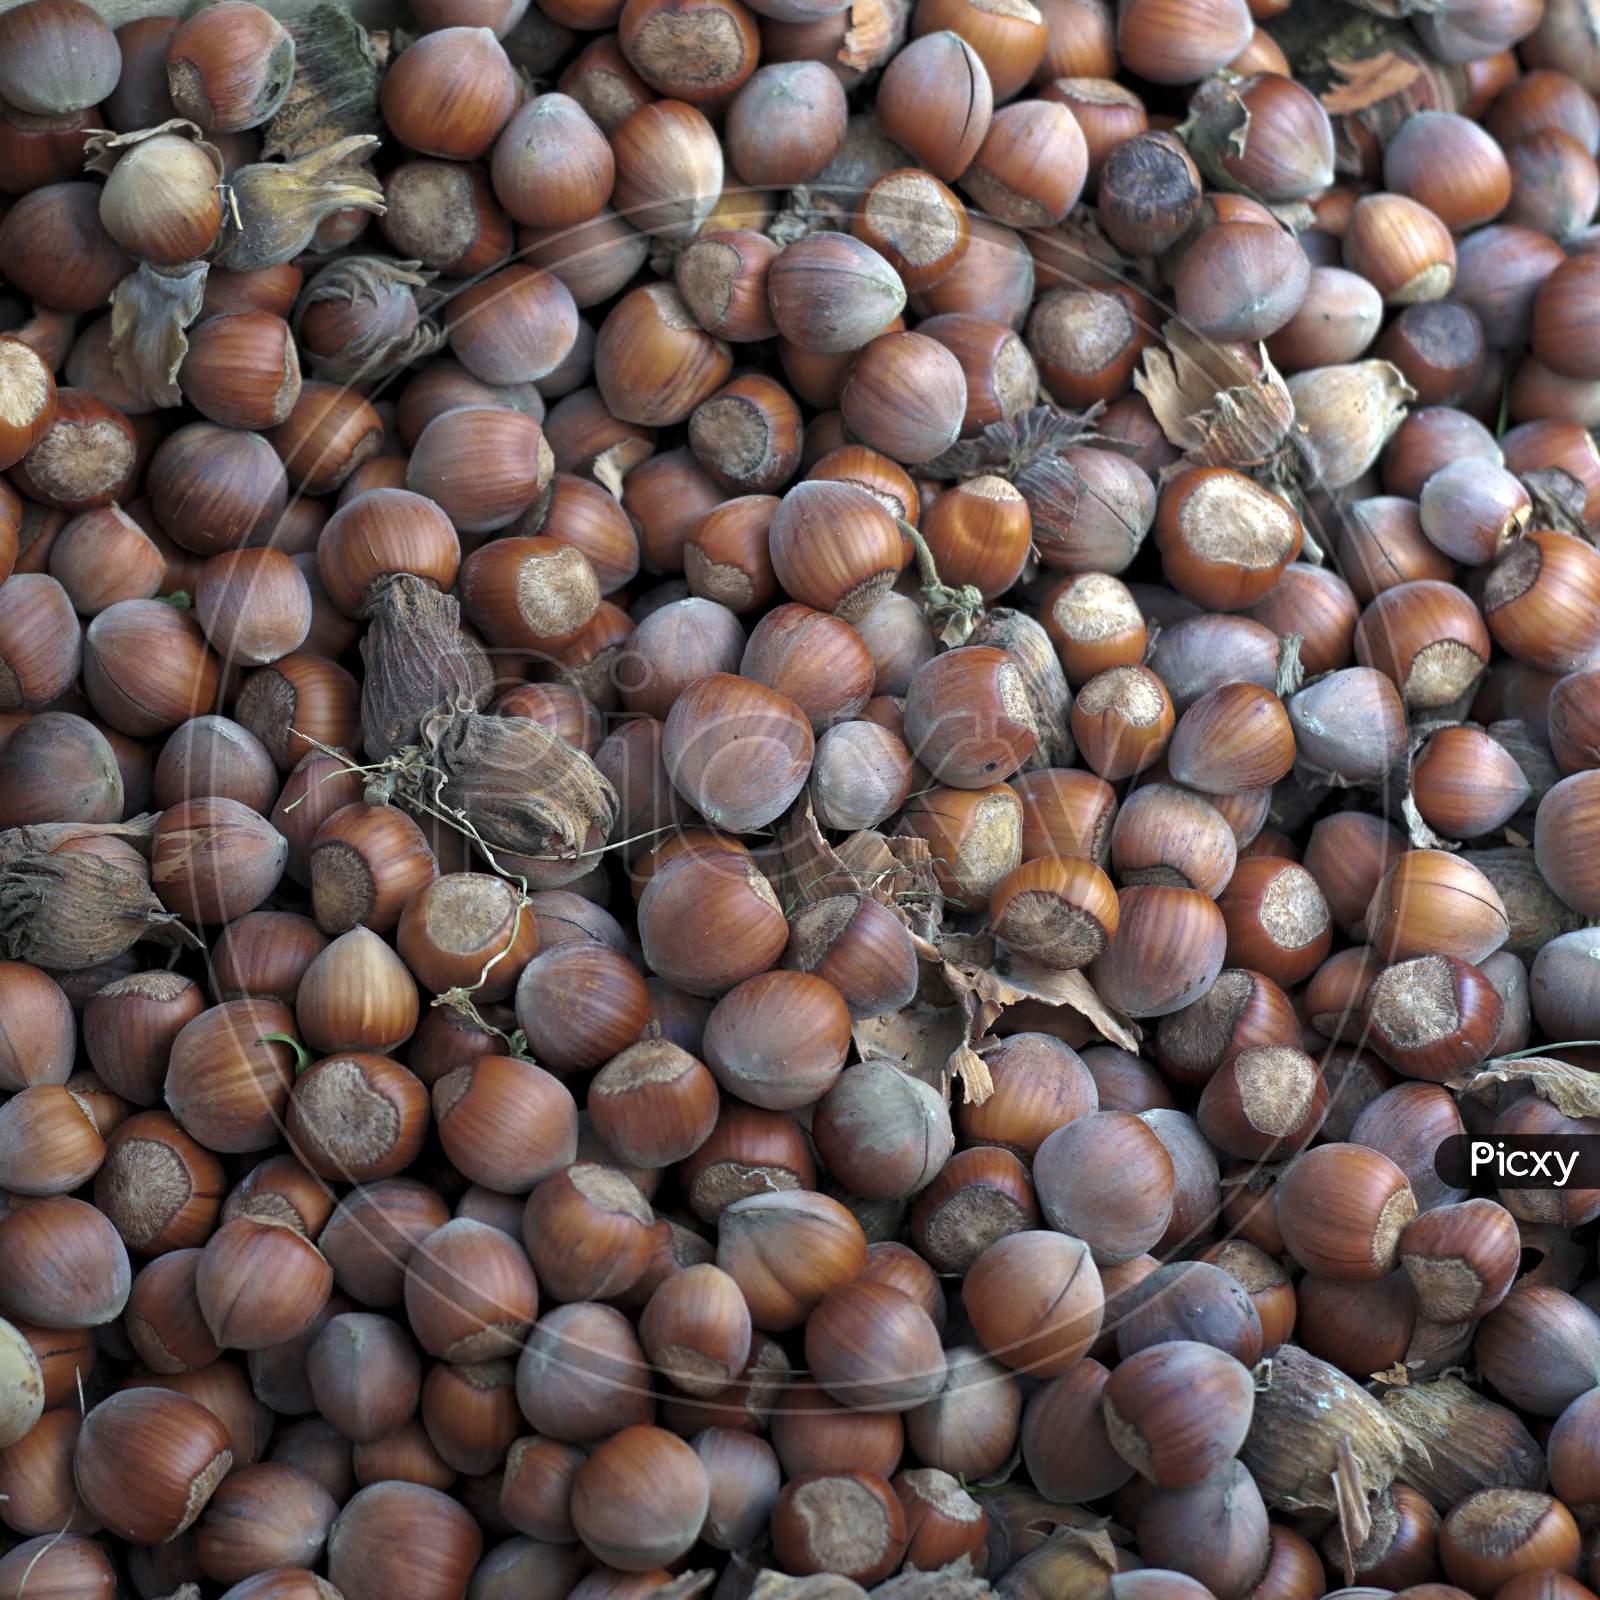 Crop Of A Surface Coated With The Hazelnuts As A Food Backdrop Composition